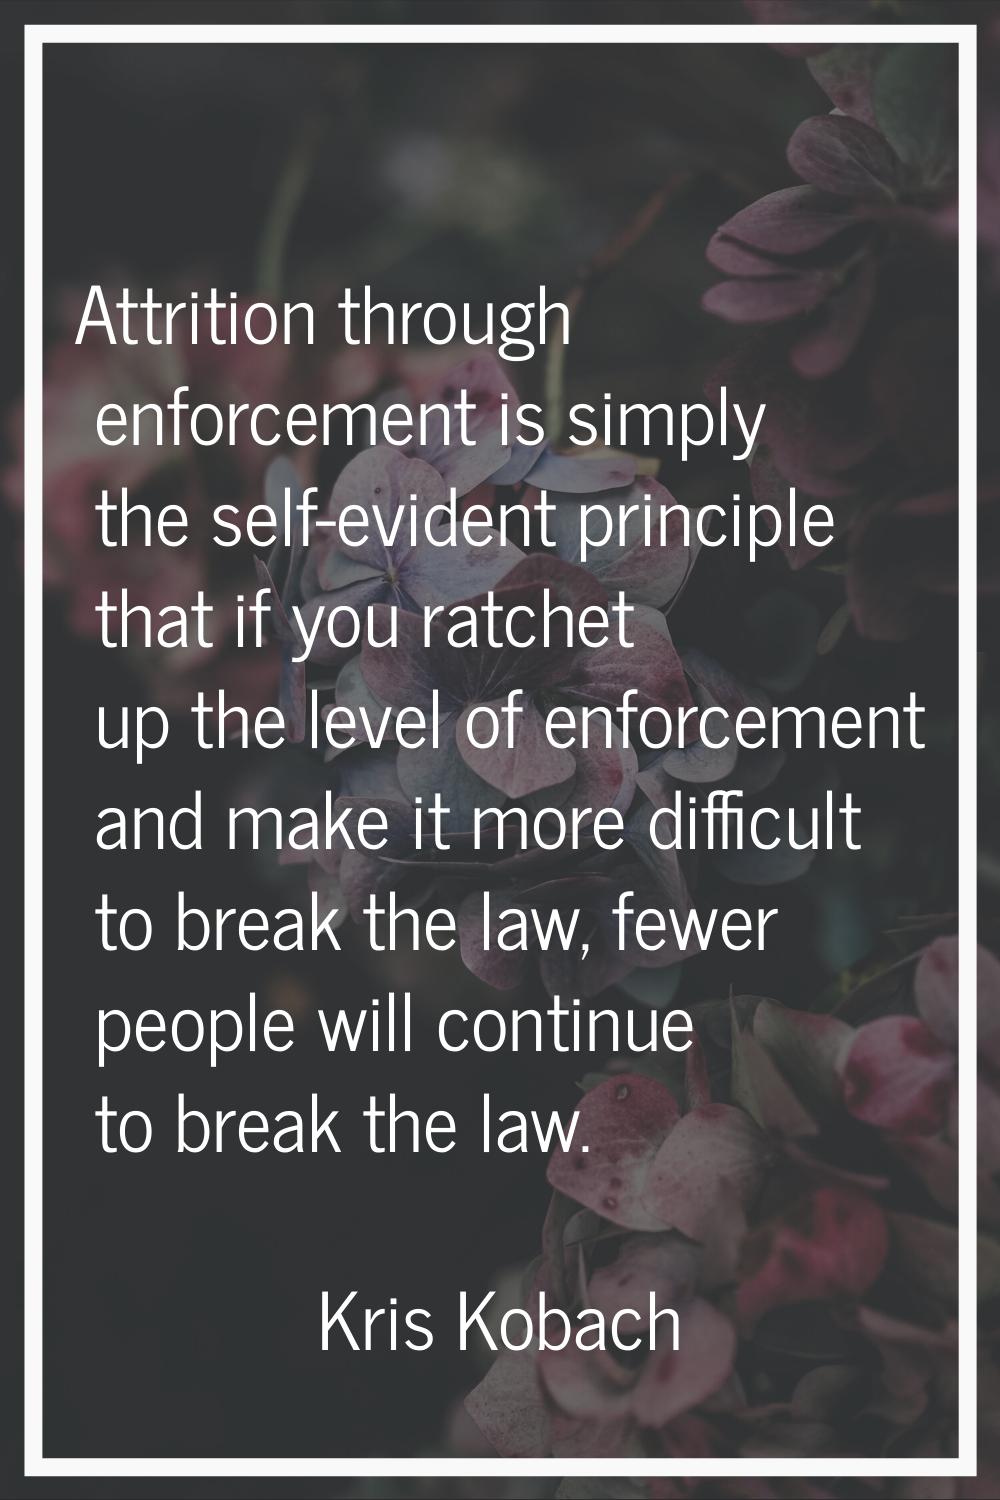 Attrition through enforcement is simply the self-evident principle that if you ratchet up the level